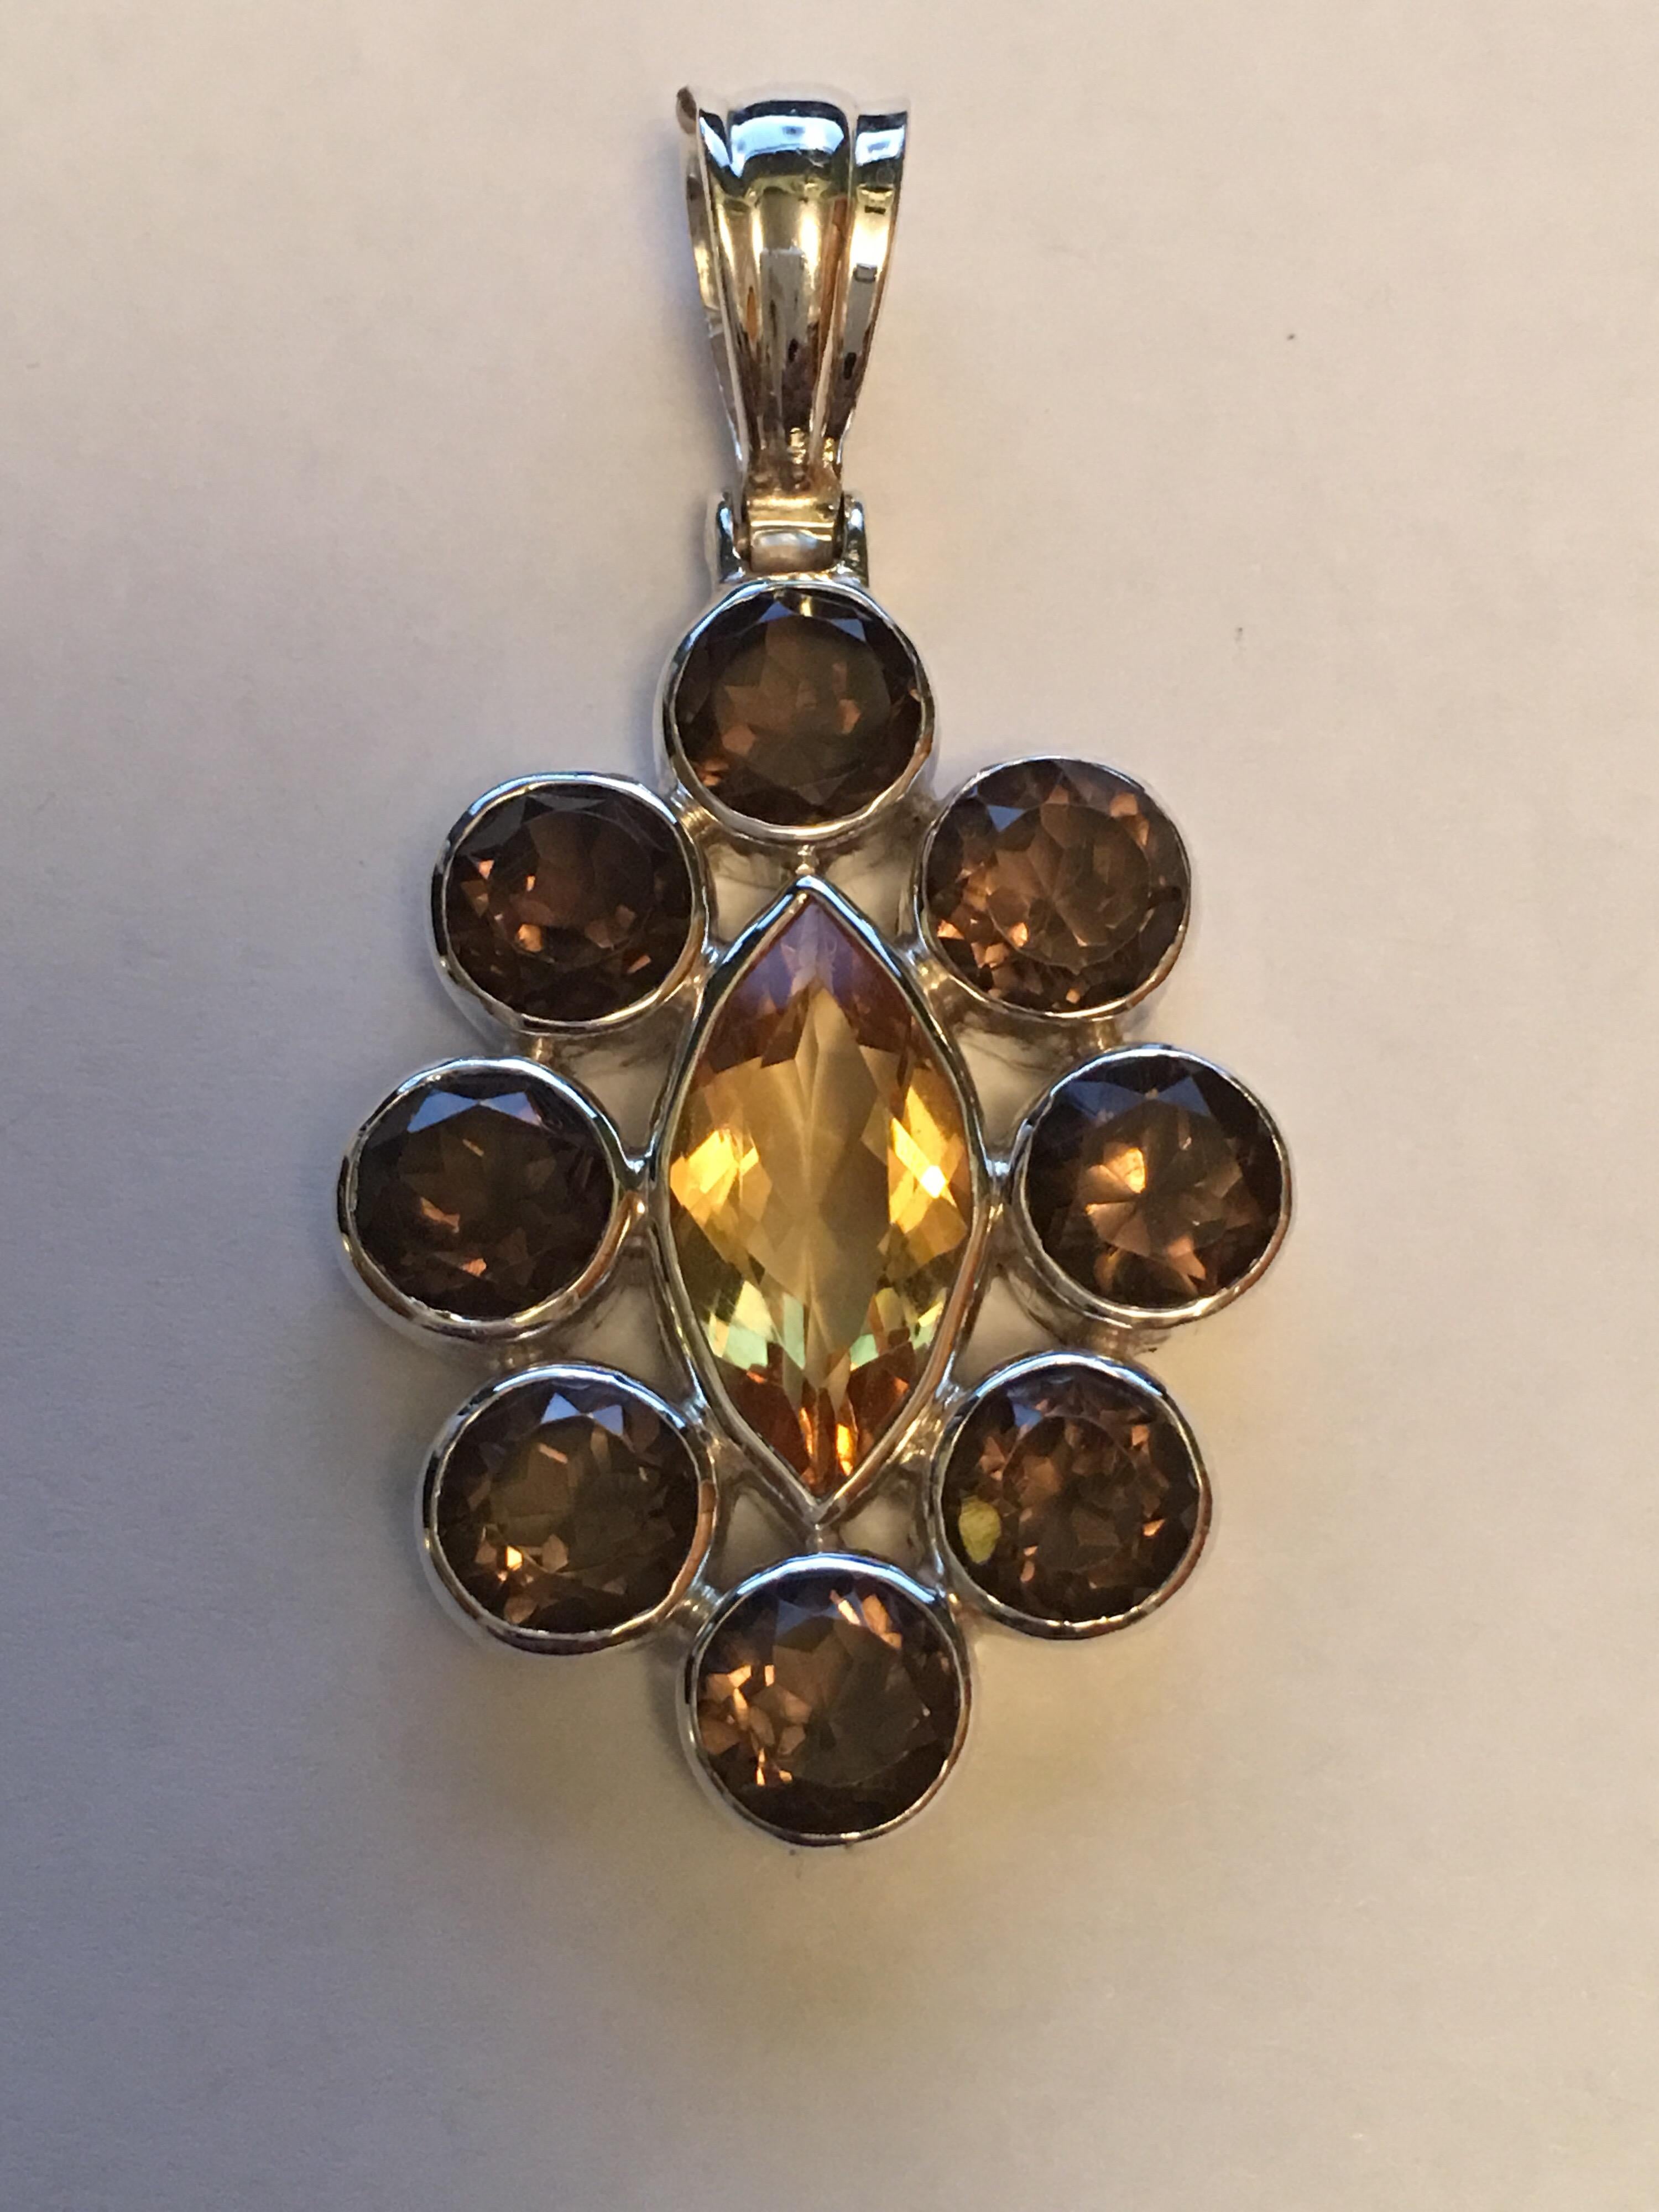 Natural 8 MM X 16 MM Citrine and 7 MM Smokey quartz set in sterling silver.
All stones are hand cut and polished stones. 
No heat or any kind of treatment is used to enhance the beauty of stone.
Pendant is one of a kind and hand crafted by skilled